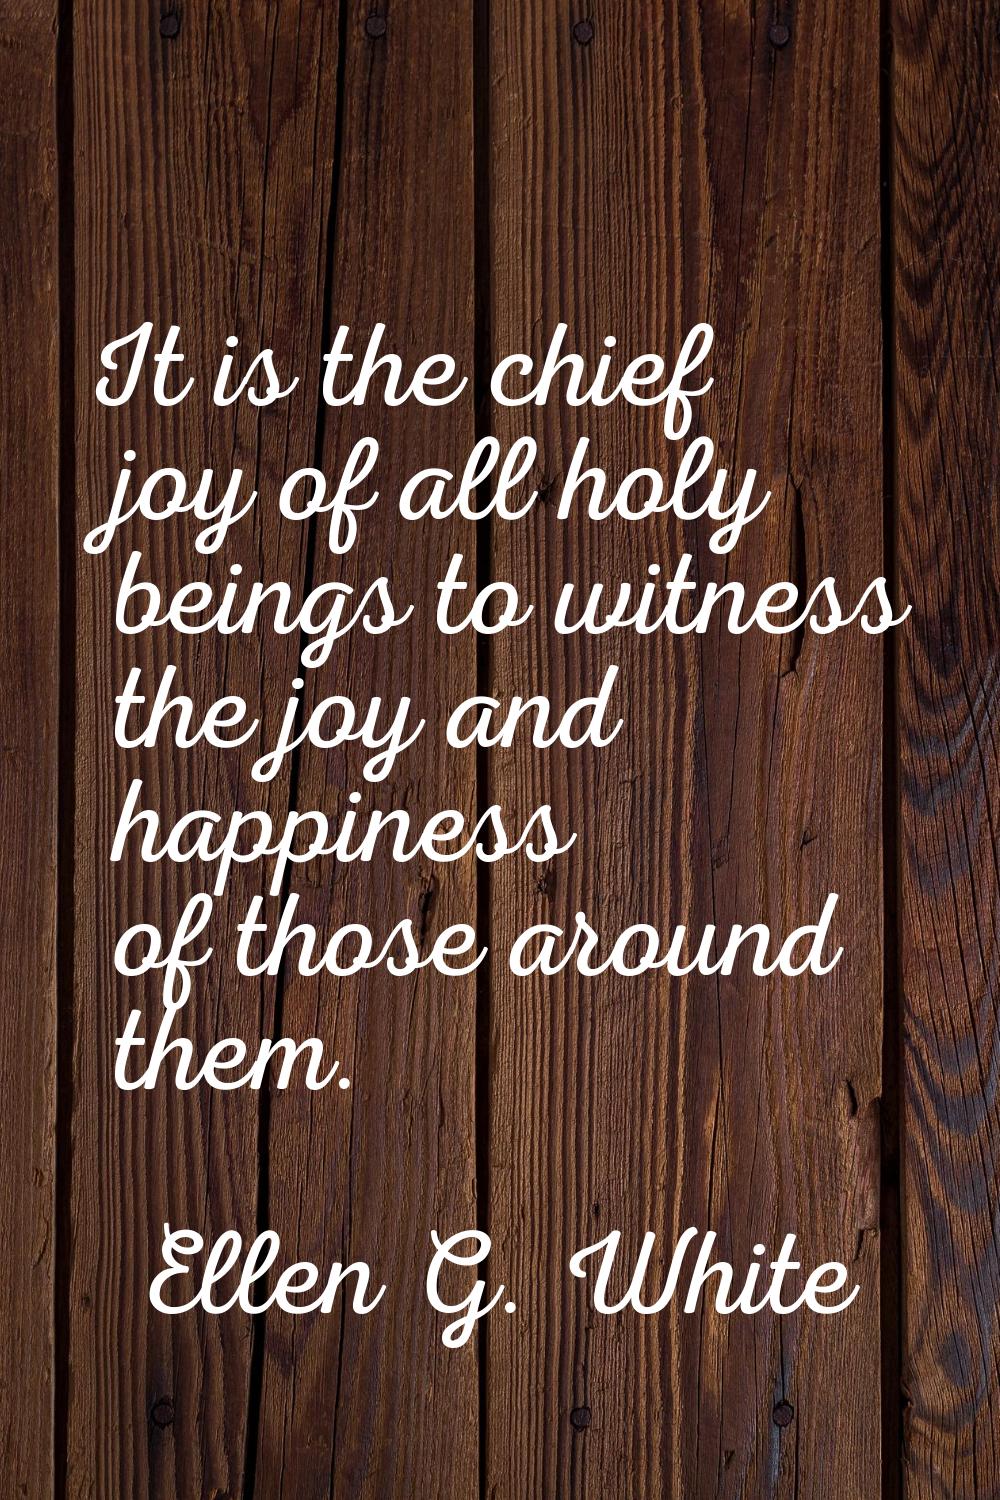 It is the chief joy of all holy beings to witness the joy and happiness of those around them.